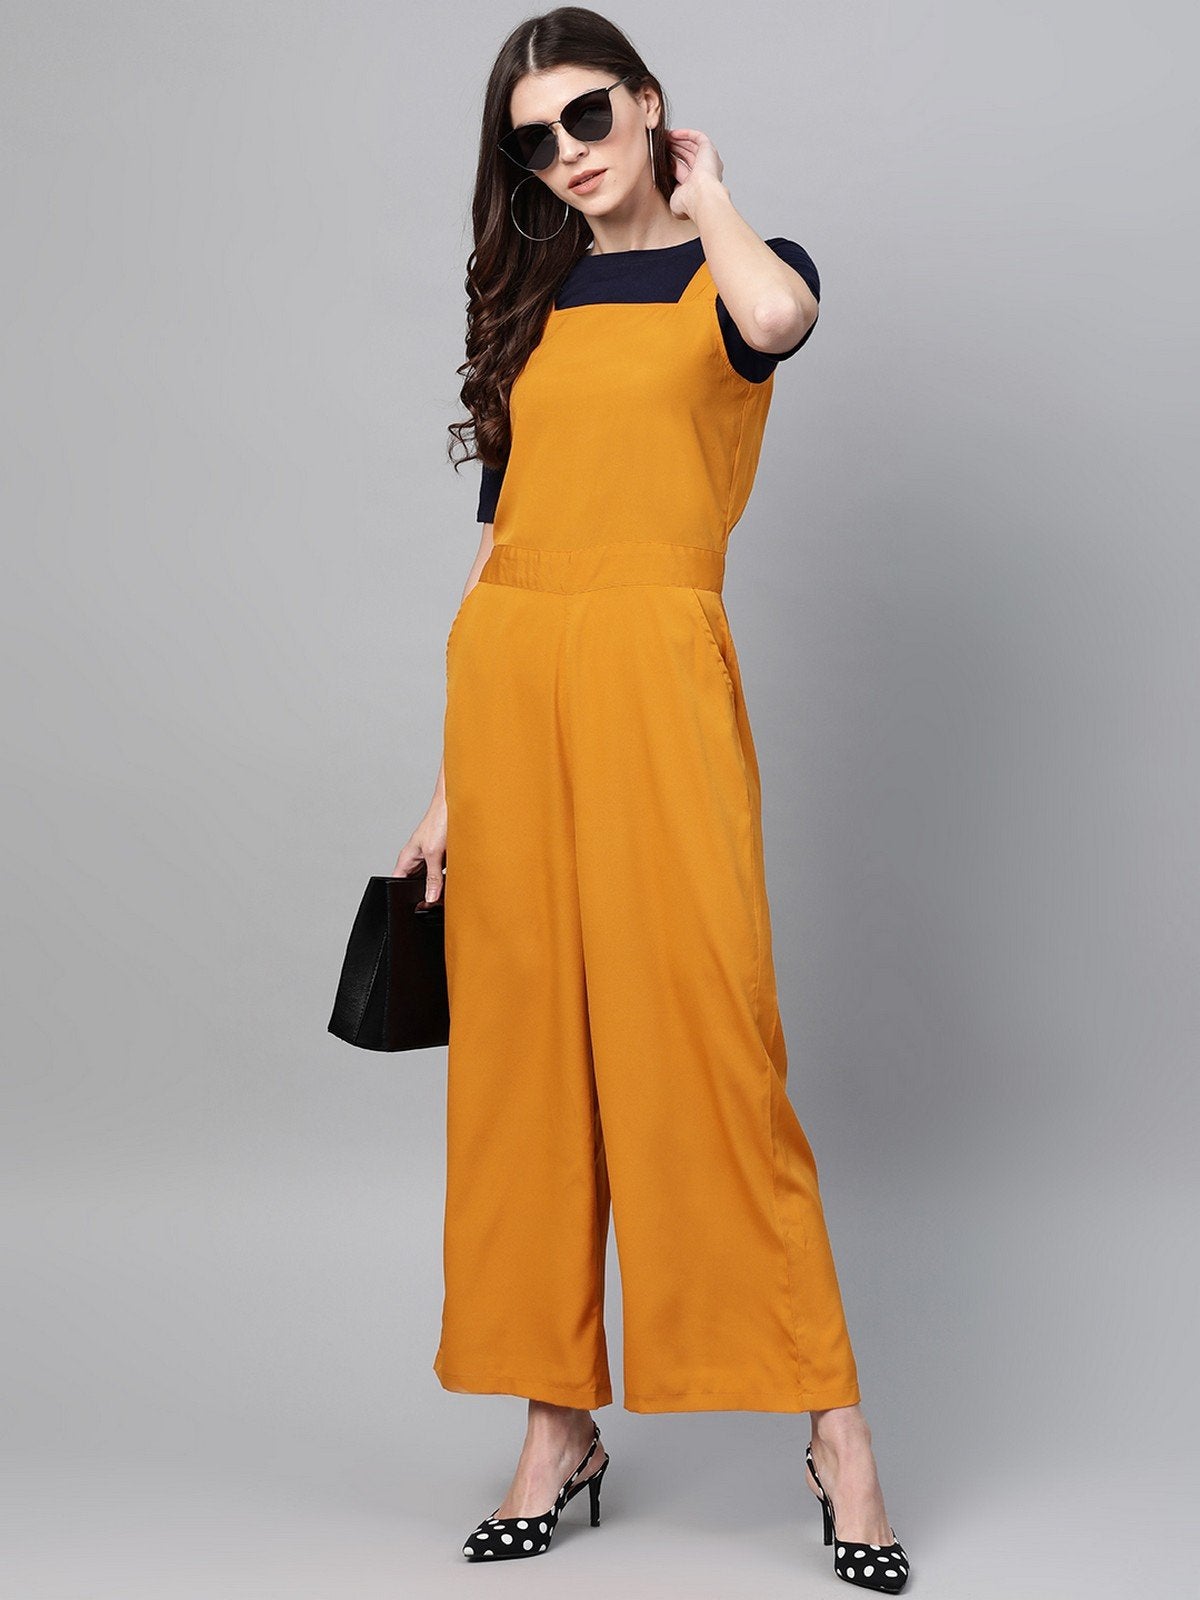 Women's Solid Jumpsuit With Contrast Top - Pannkh